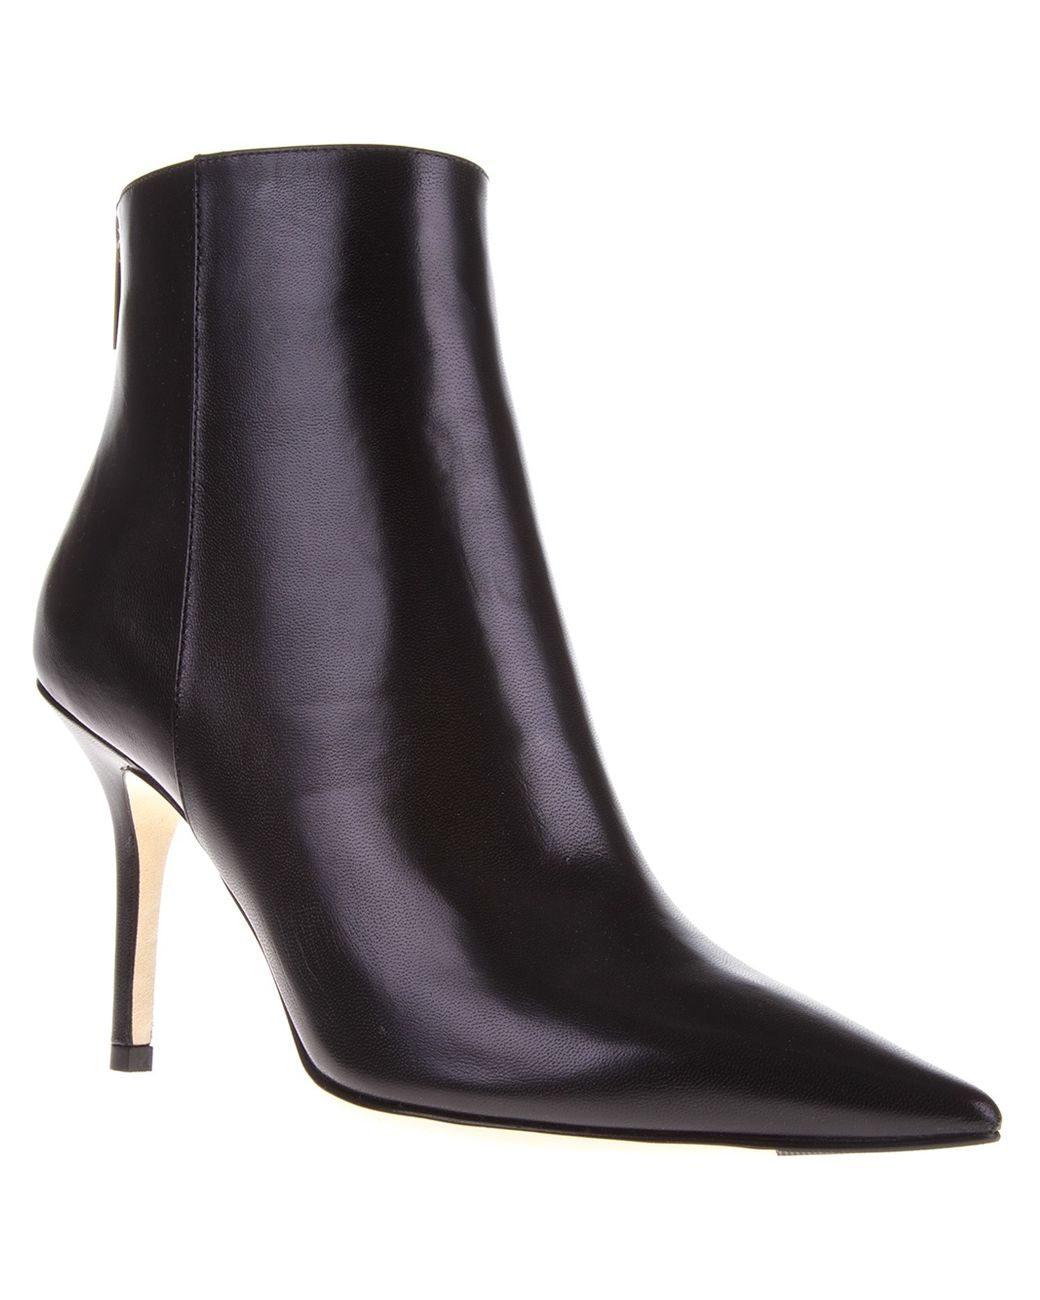 Jimmy Choo Amore Ankle Boot in Black | Lyst